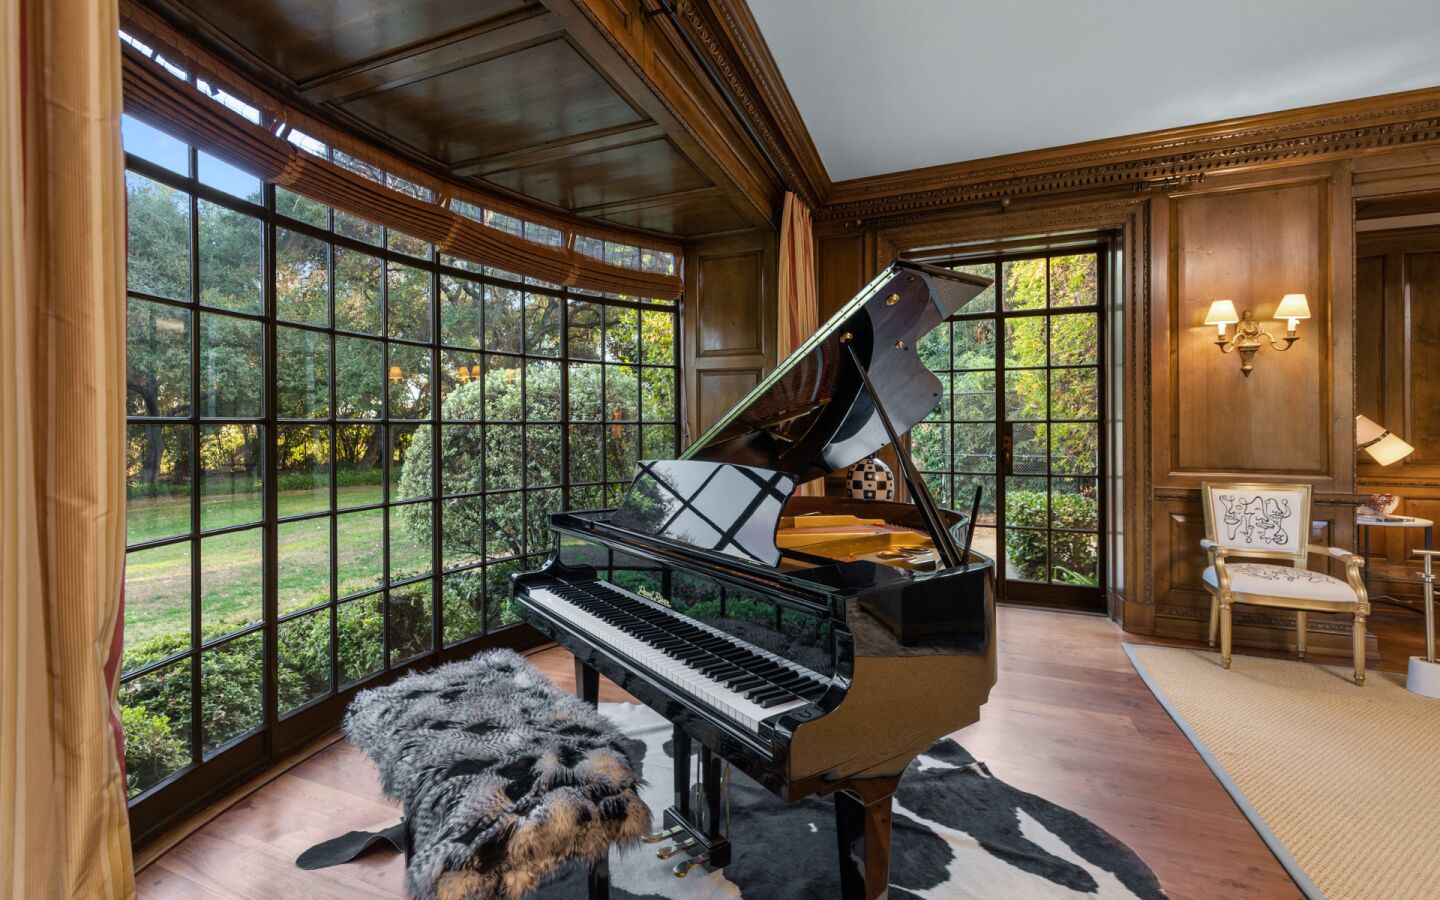 A grand piano in a room with a tall, long curved window